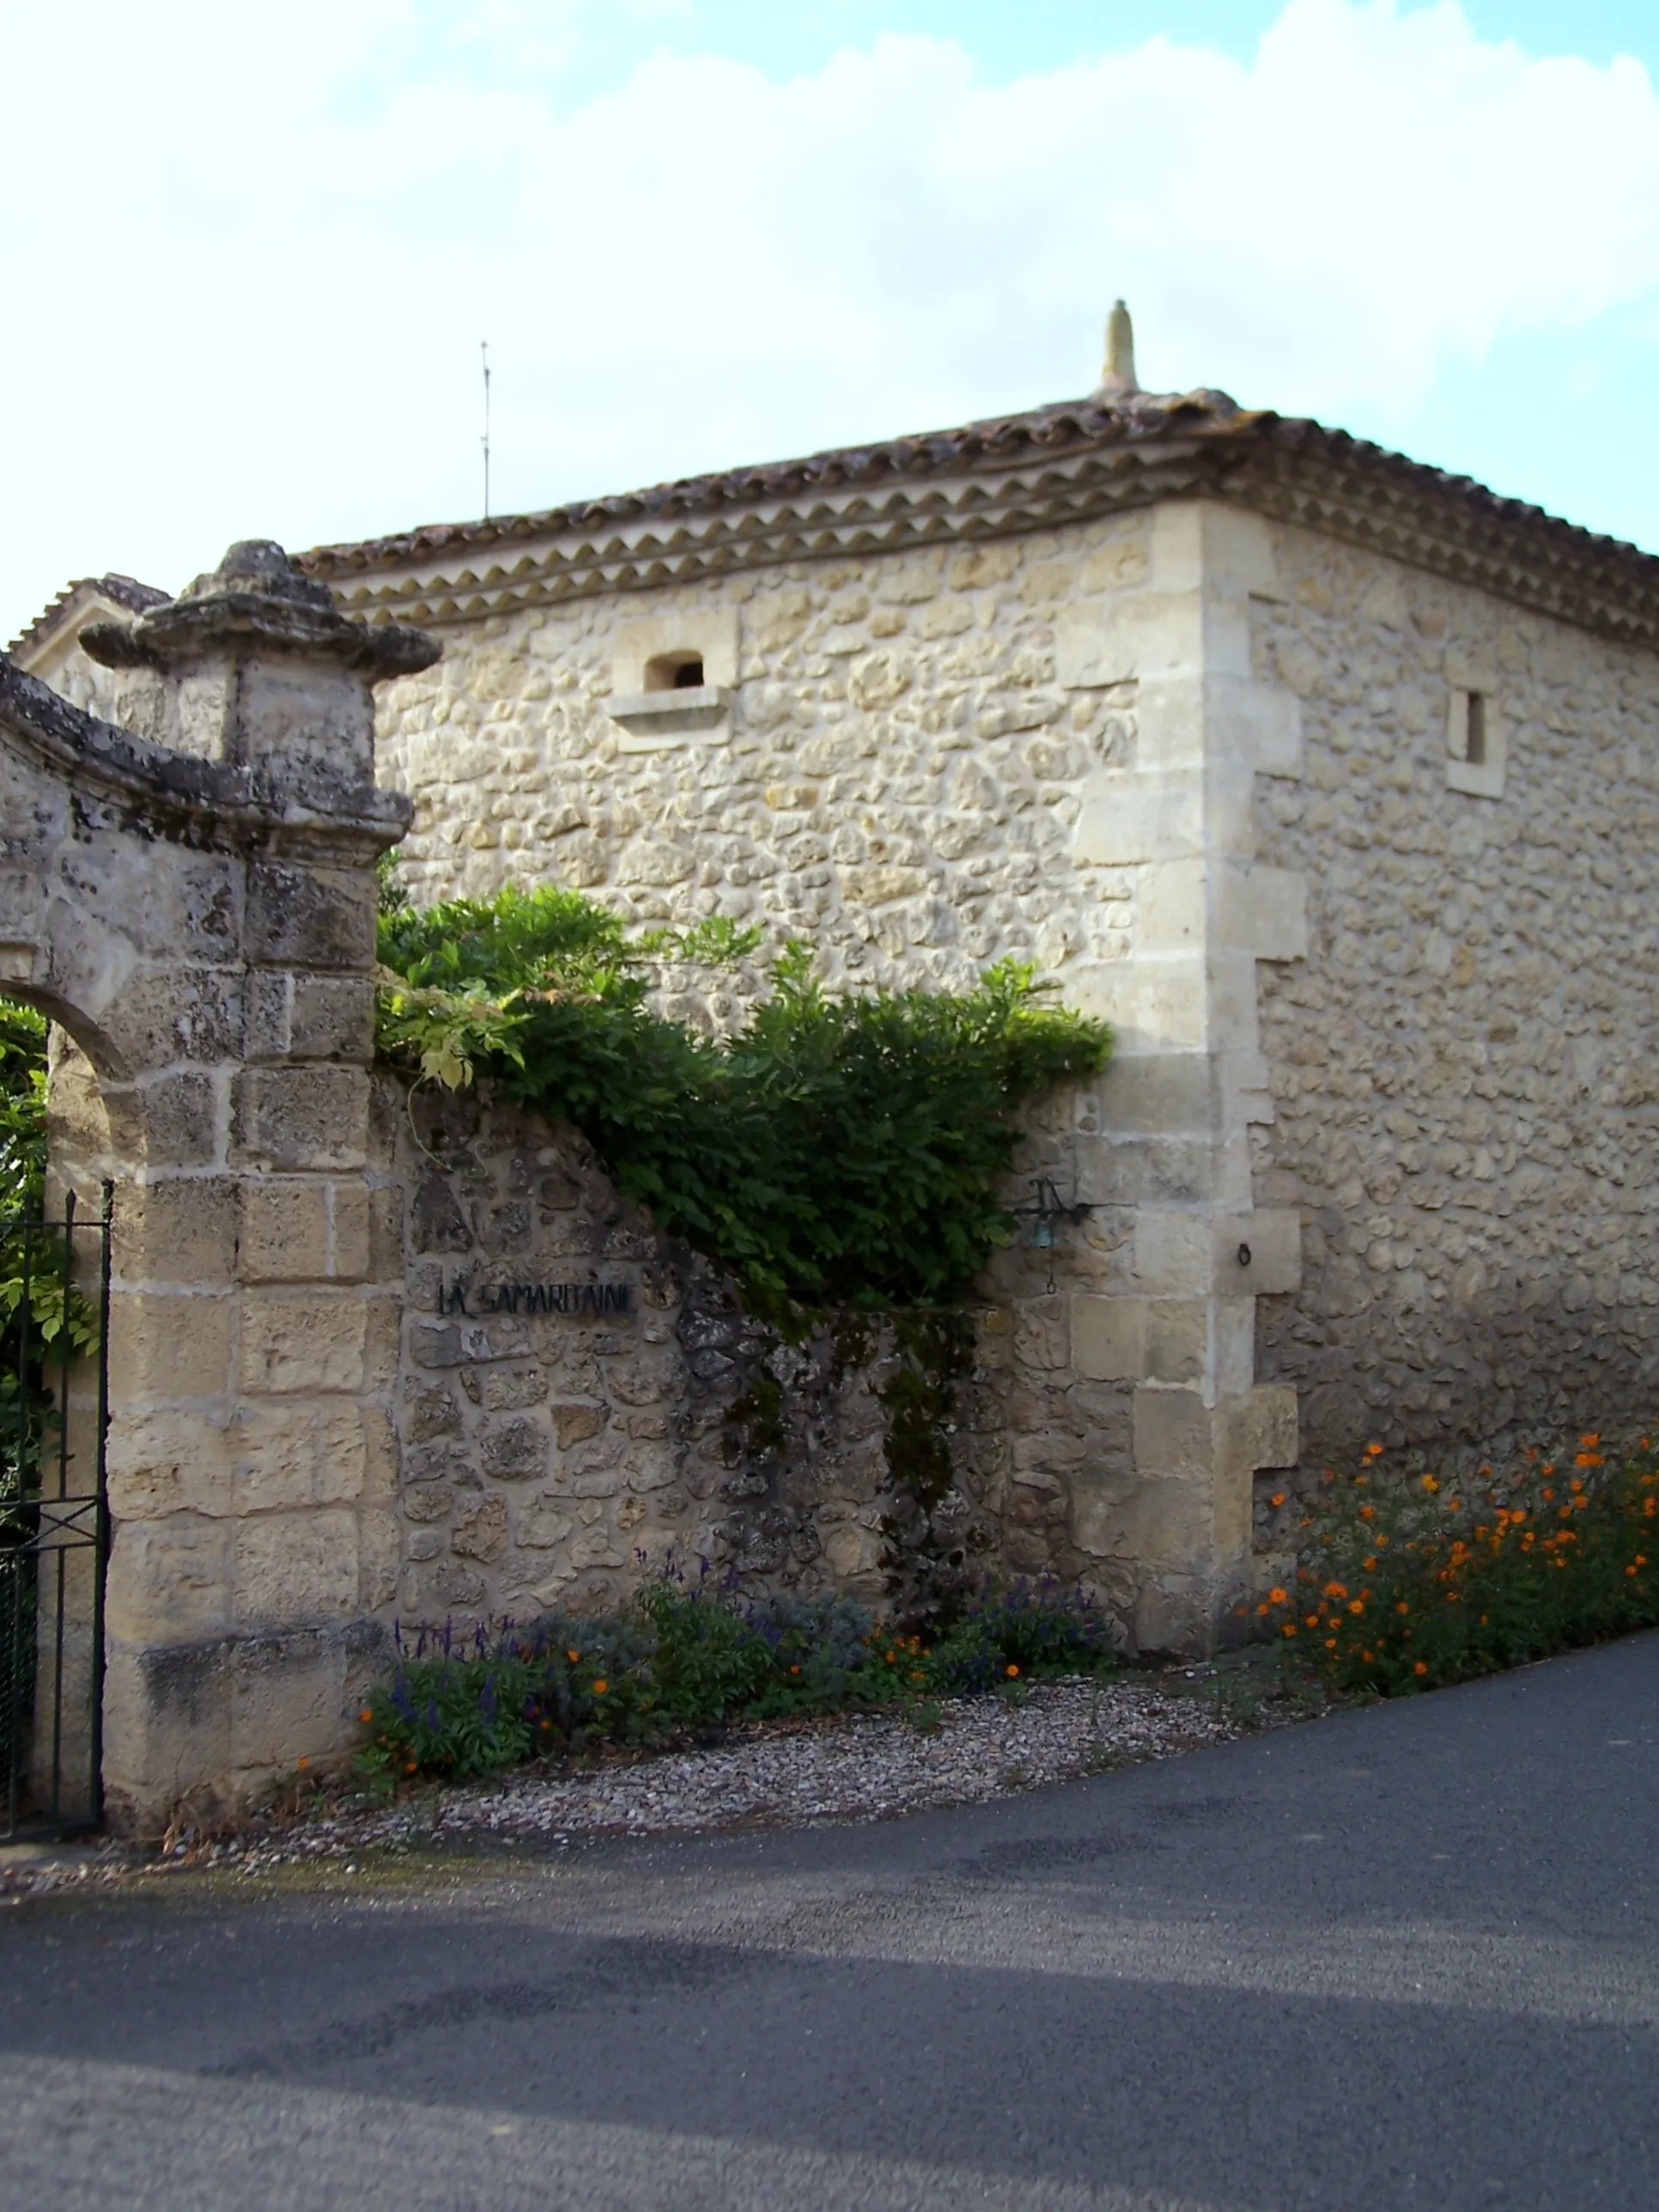 Photo showing: Dovecote tower in the village of Coirac (Gironde, France)